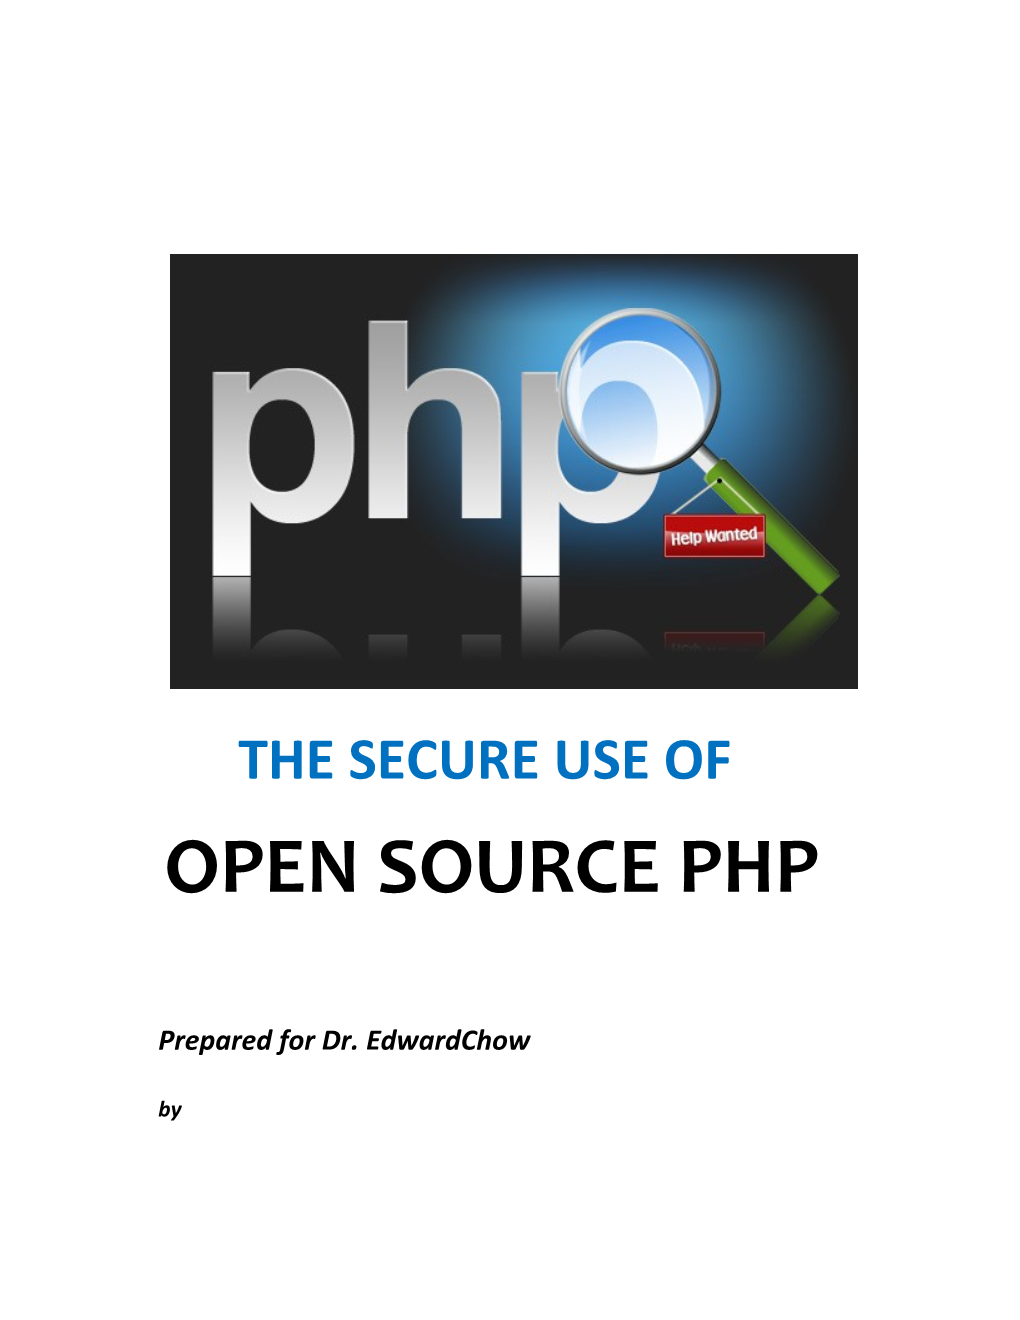 The Secure Use of Open Source PHP